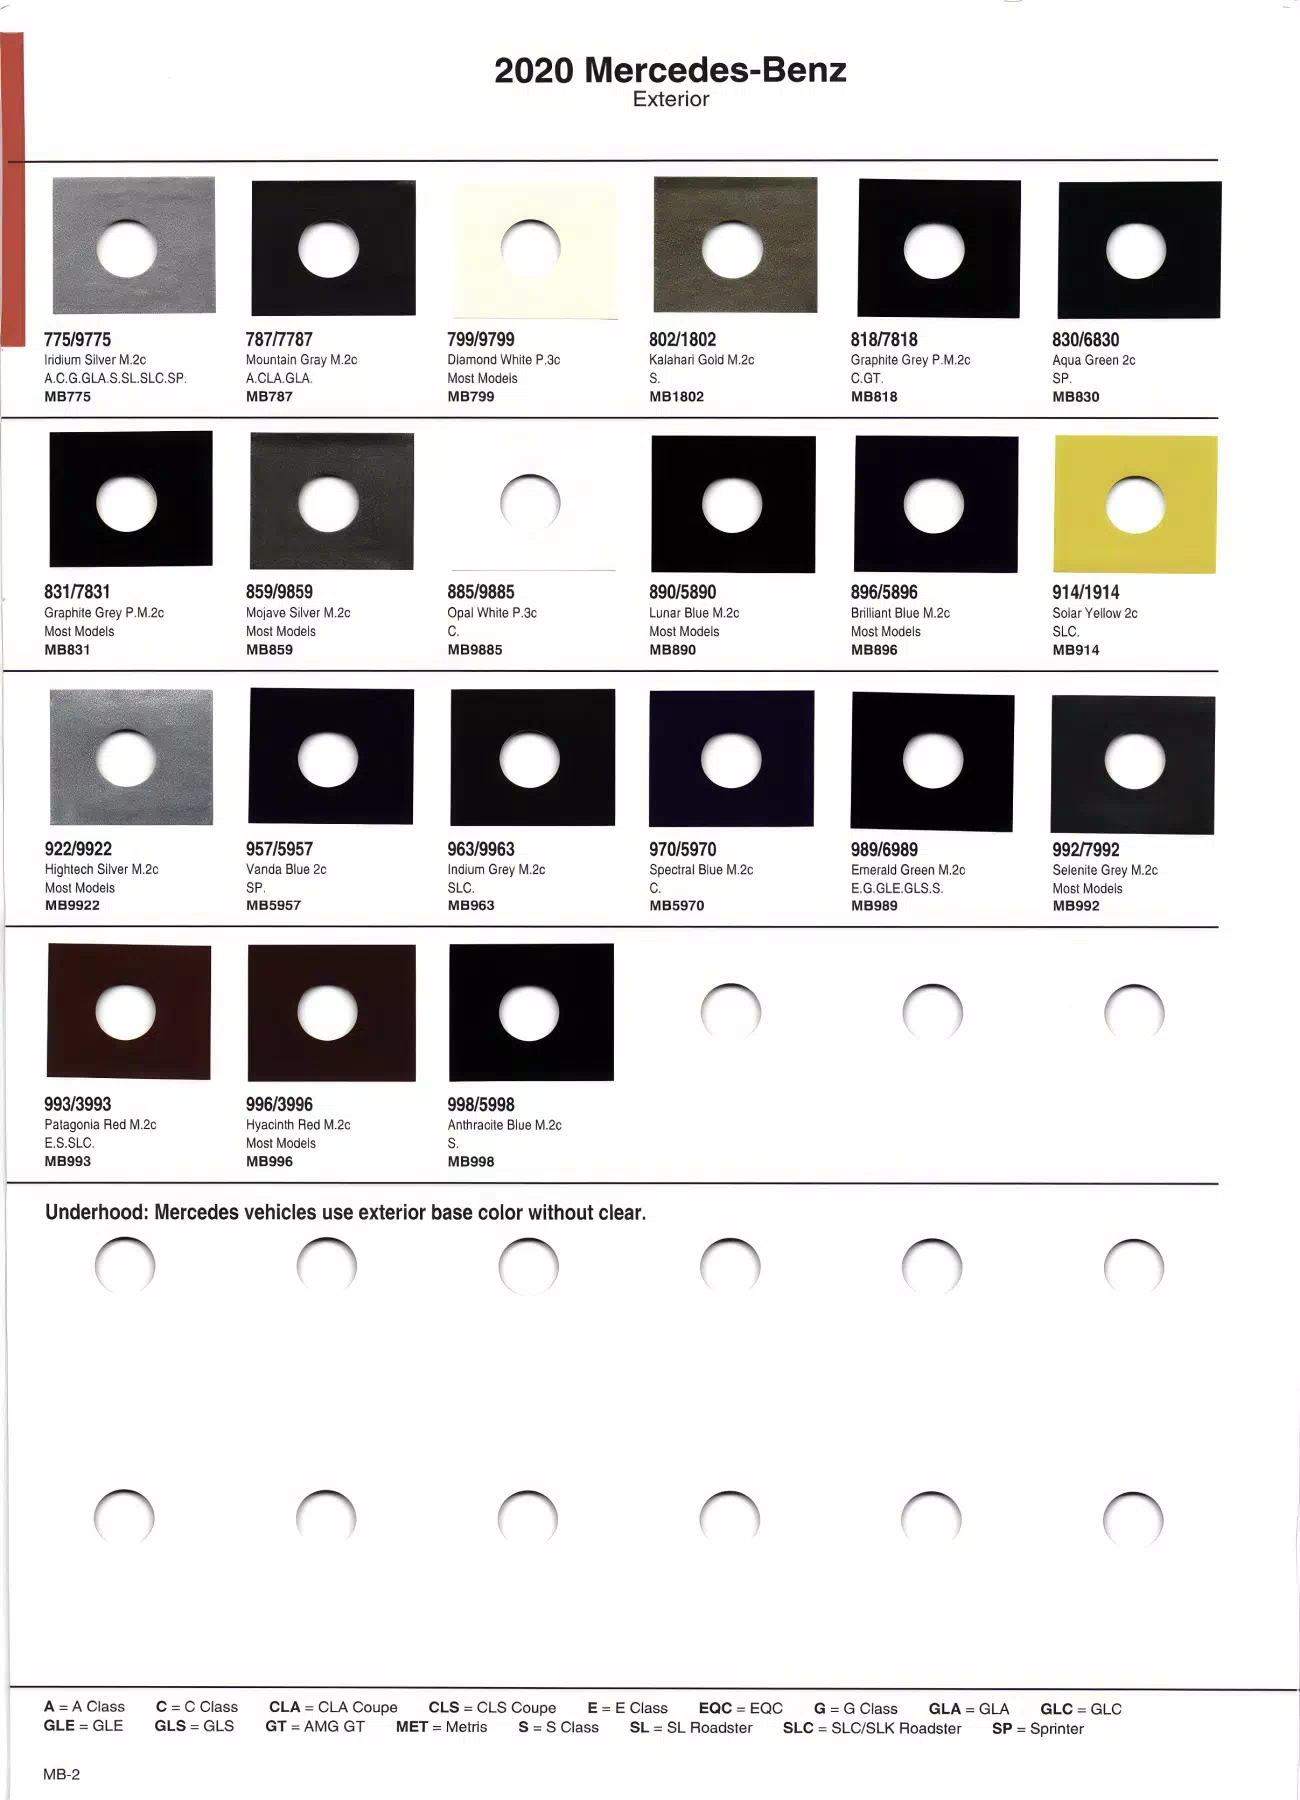 Oem Color Swatches with Paint codes, Color Names, Color Shades, and Akzo stock numbers.  This is a "Paint Chart"